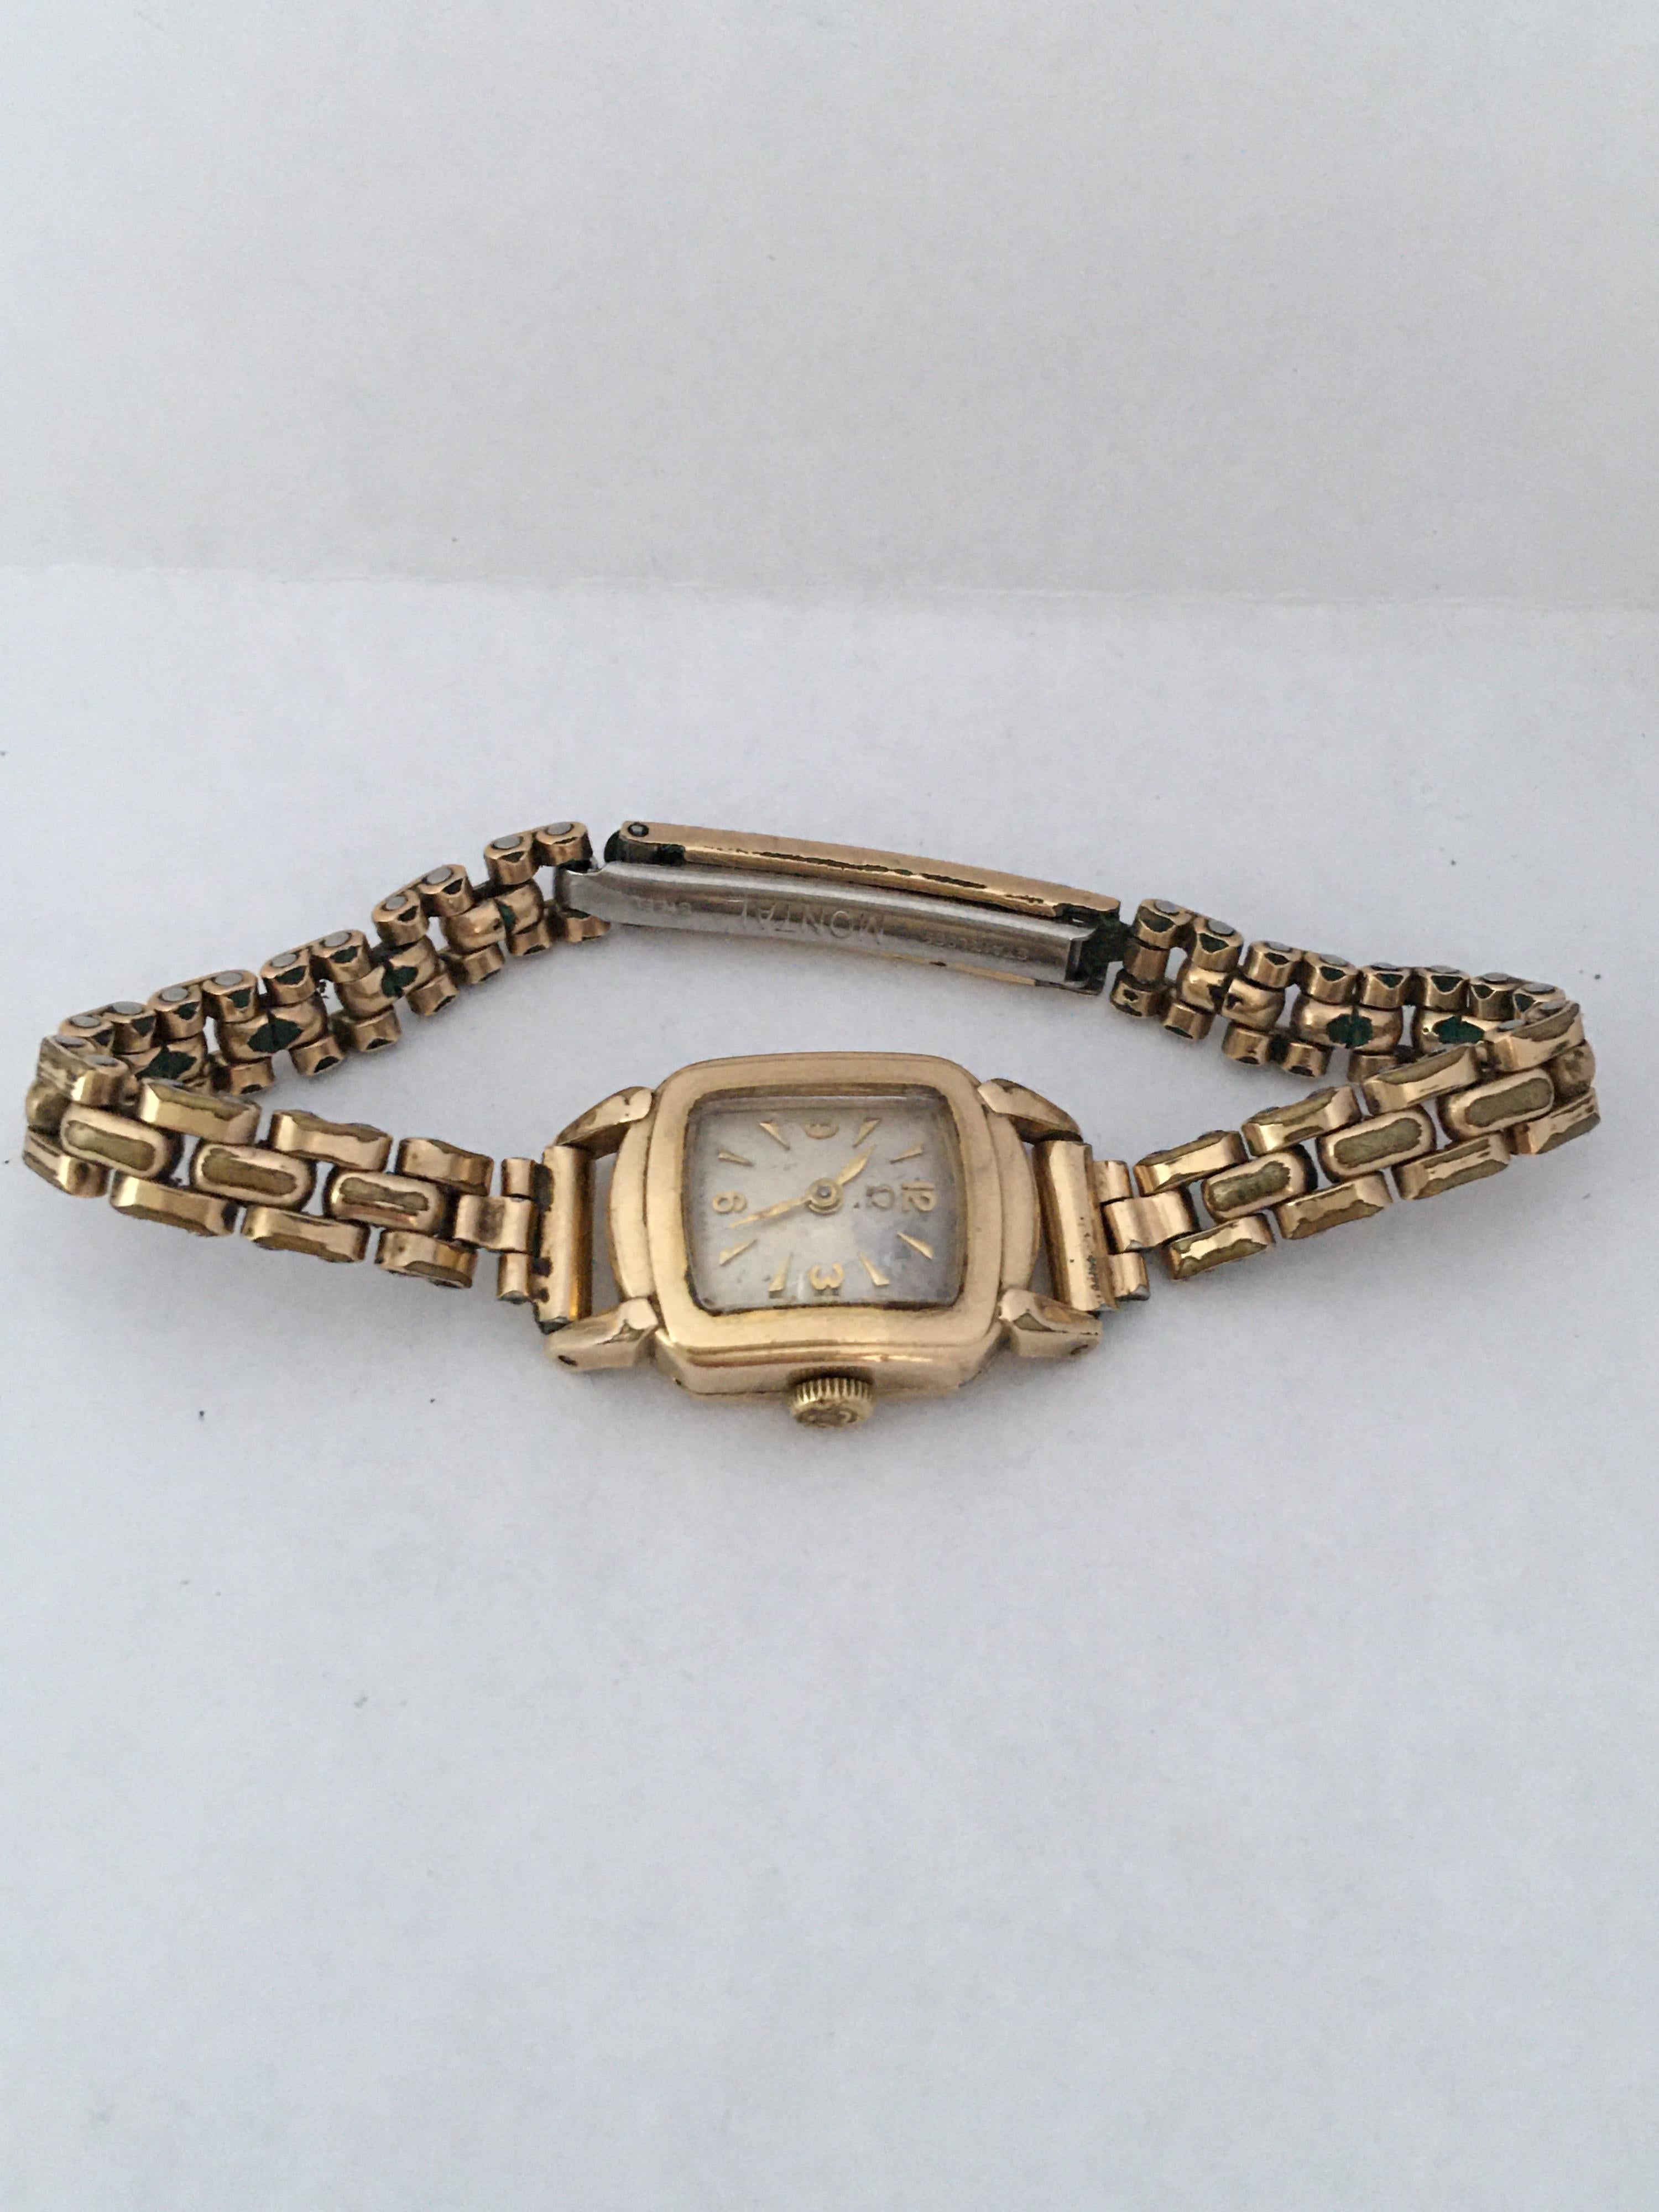 Ladies Omega Vintage Gold-Plated Mechanical Watch In Good Condition For Sale In Carlisle, GB